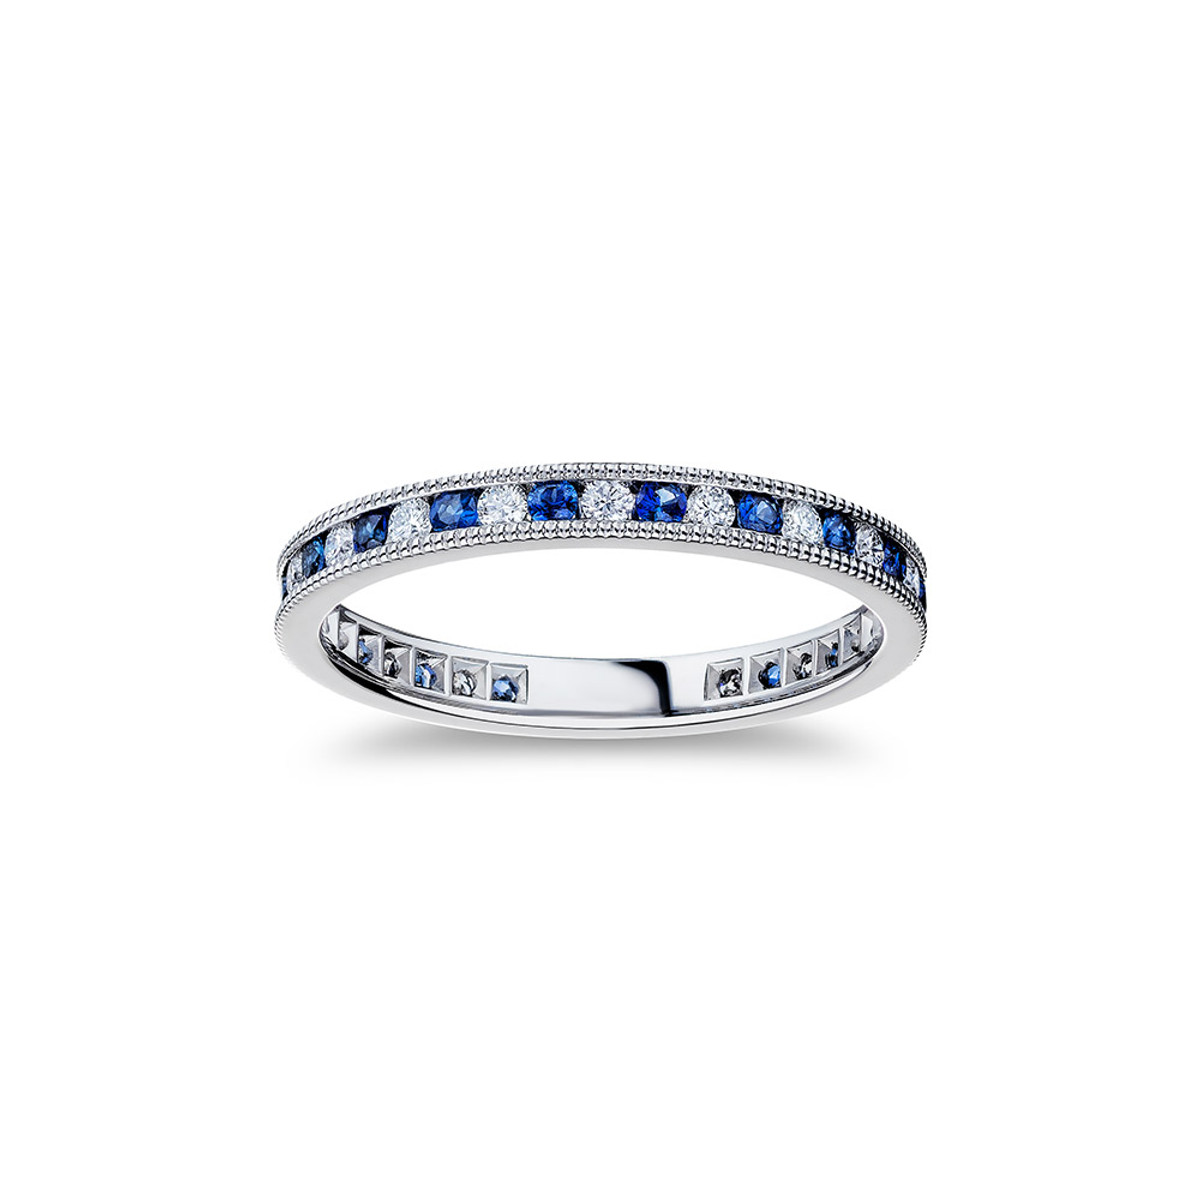 Hyde Park Collection 18K White Gold Diamond & Sapphire Band-43261 Product Image